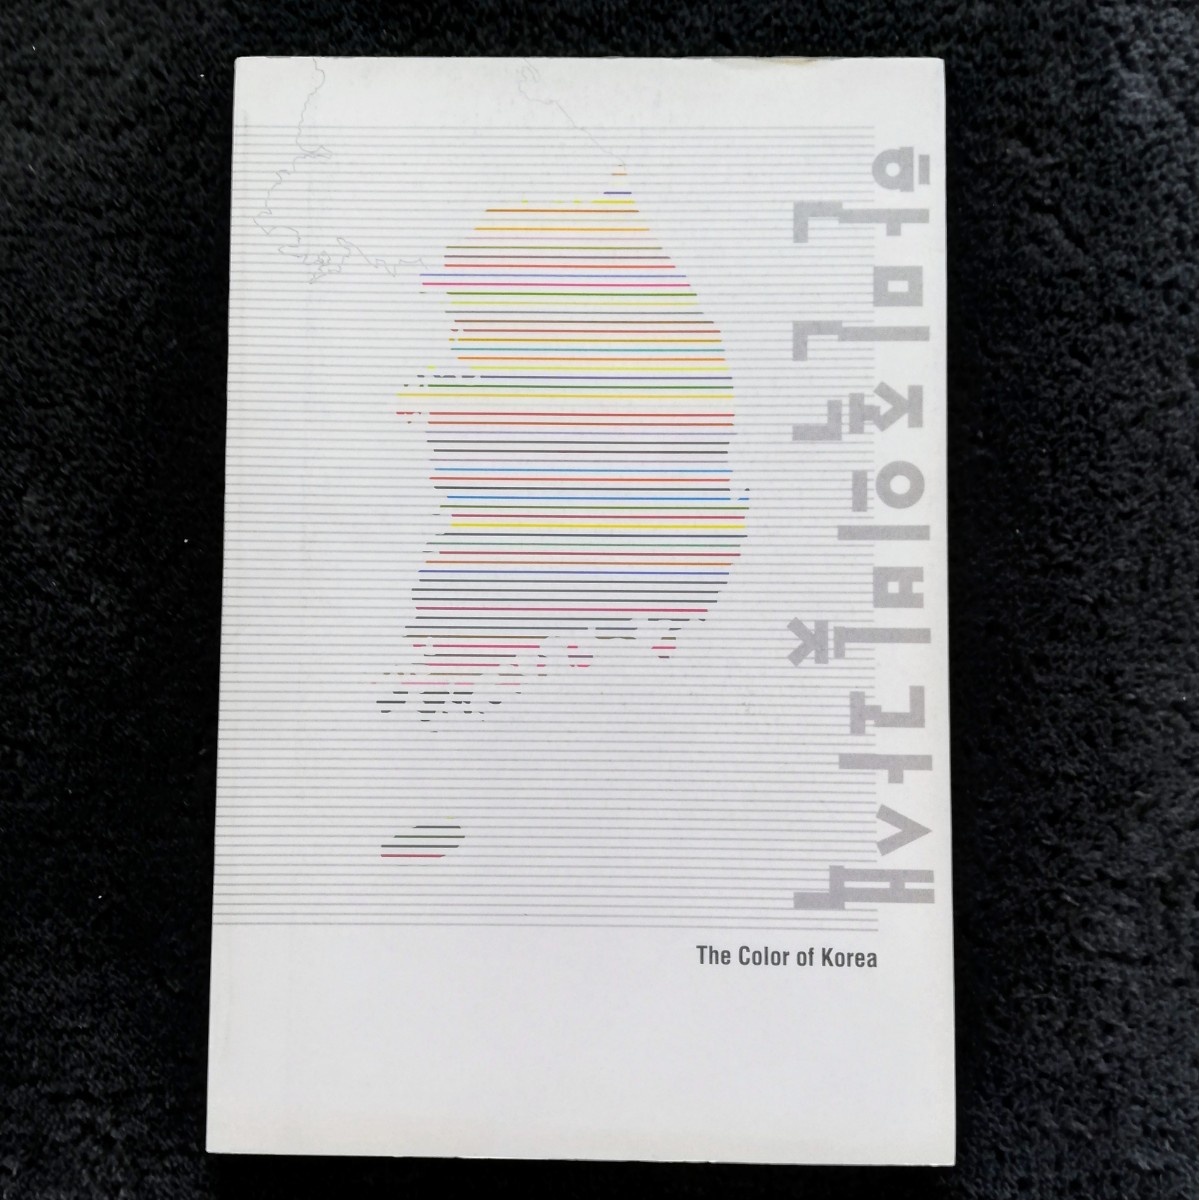 z2..[ Catalog ] Color and Light of Korea 2002-03, Seoul Museum of Art / Color and Light of the Han People / Color Culture of Korea / Inuhiko Shihota / From Lines to Colors, Painting, Art Book, Collection, Catalog